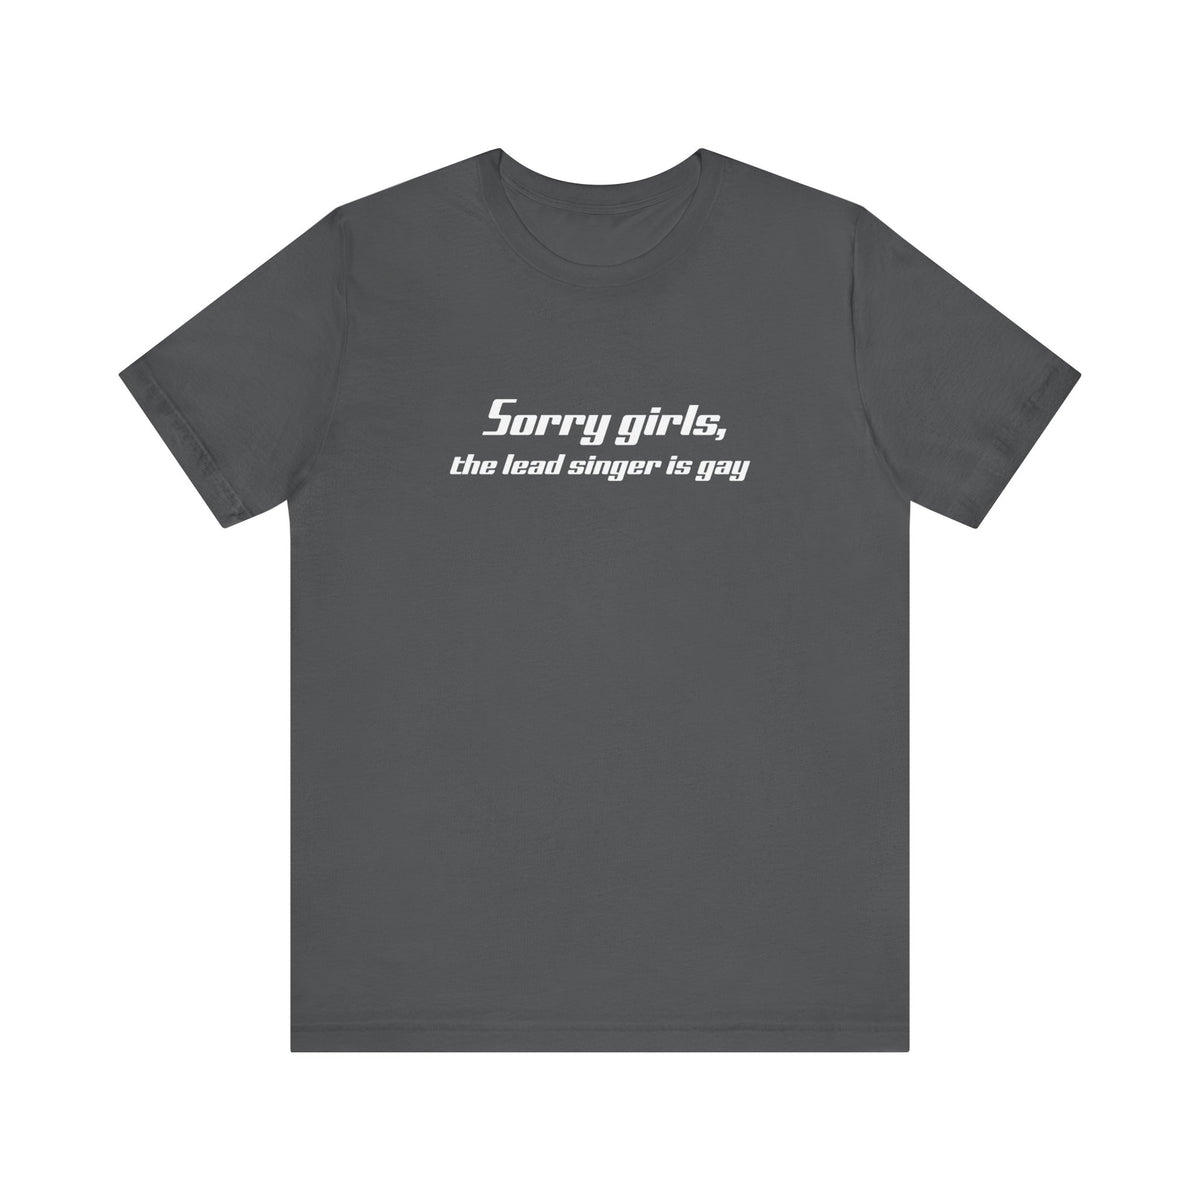 Sorry Girls - The Lead Singer Is Gay  - Men's T-Shirt